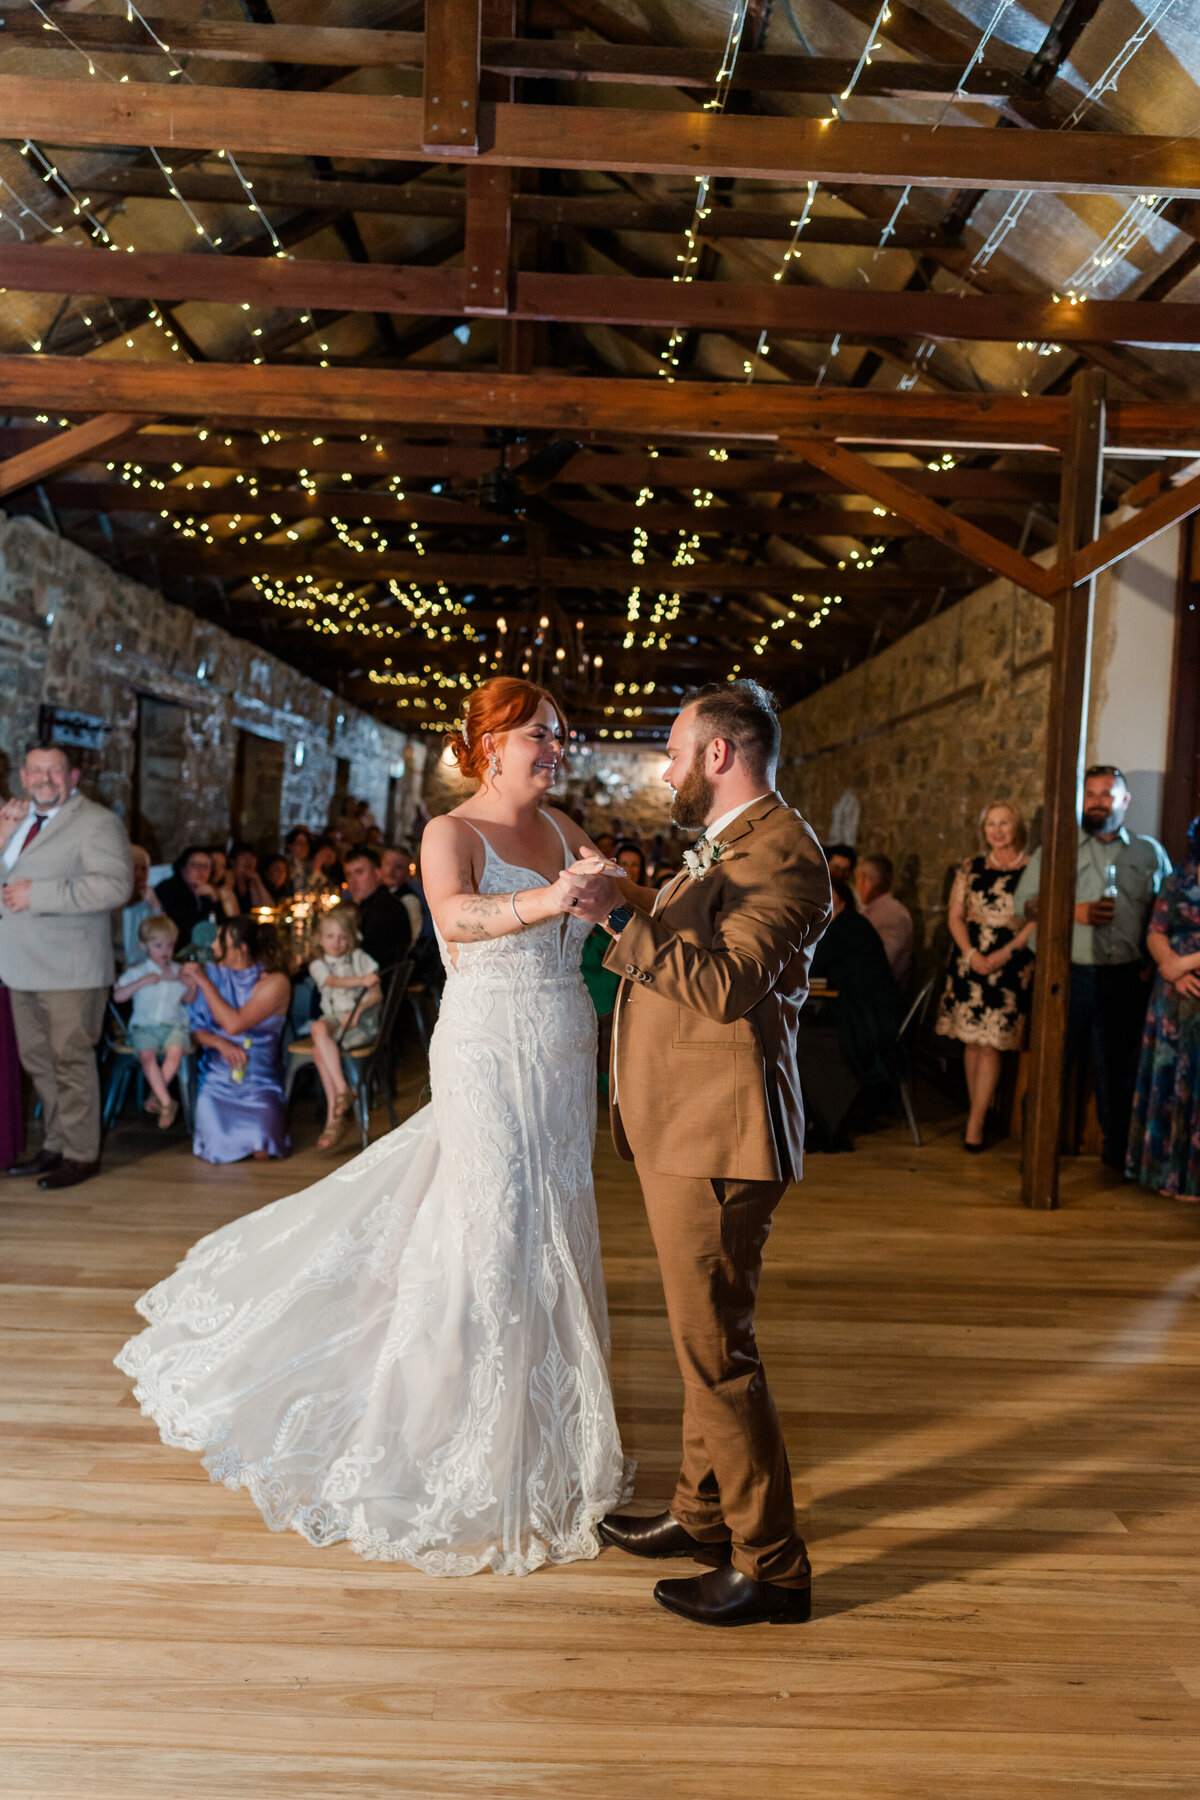 Candid wedding moments at the stable